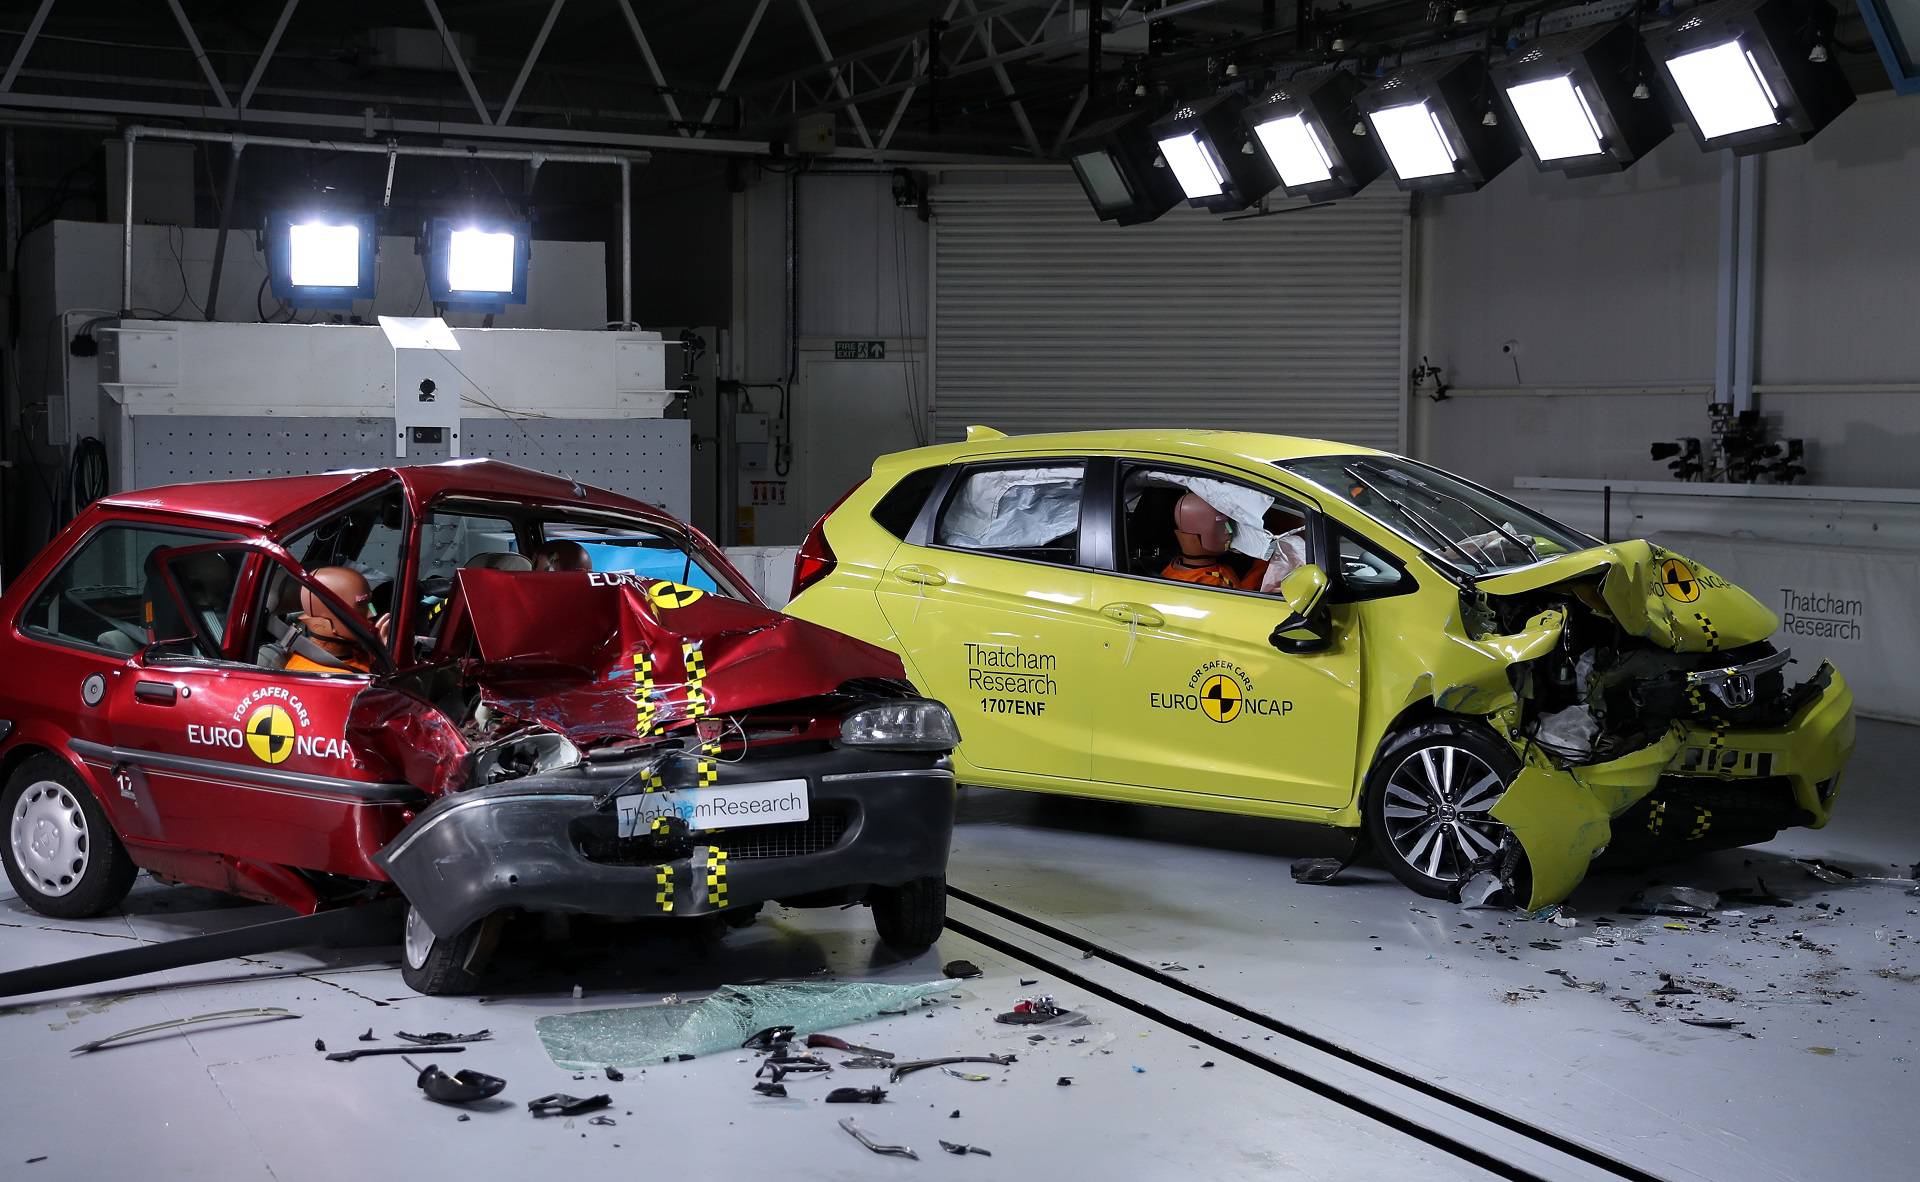 20 Years of the official crash test facility